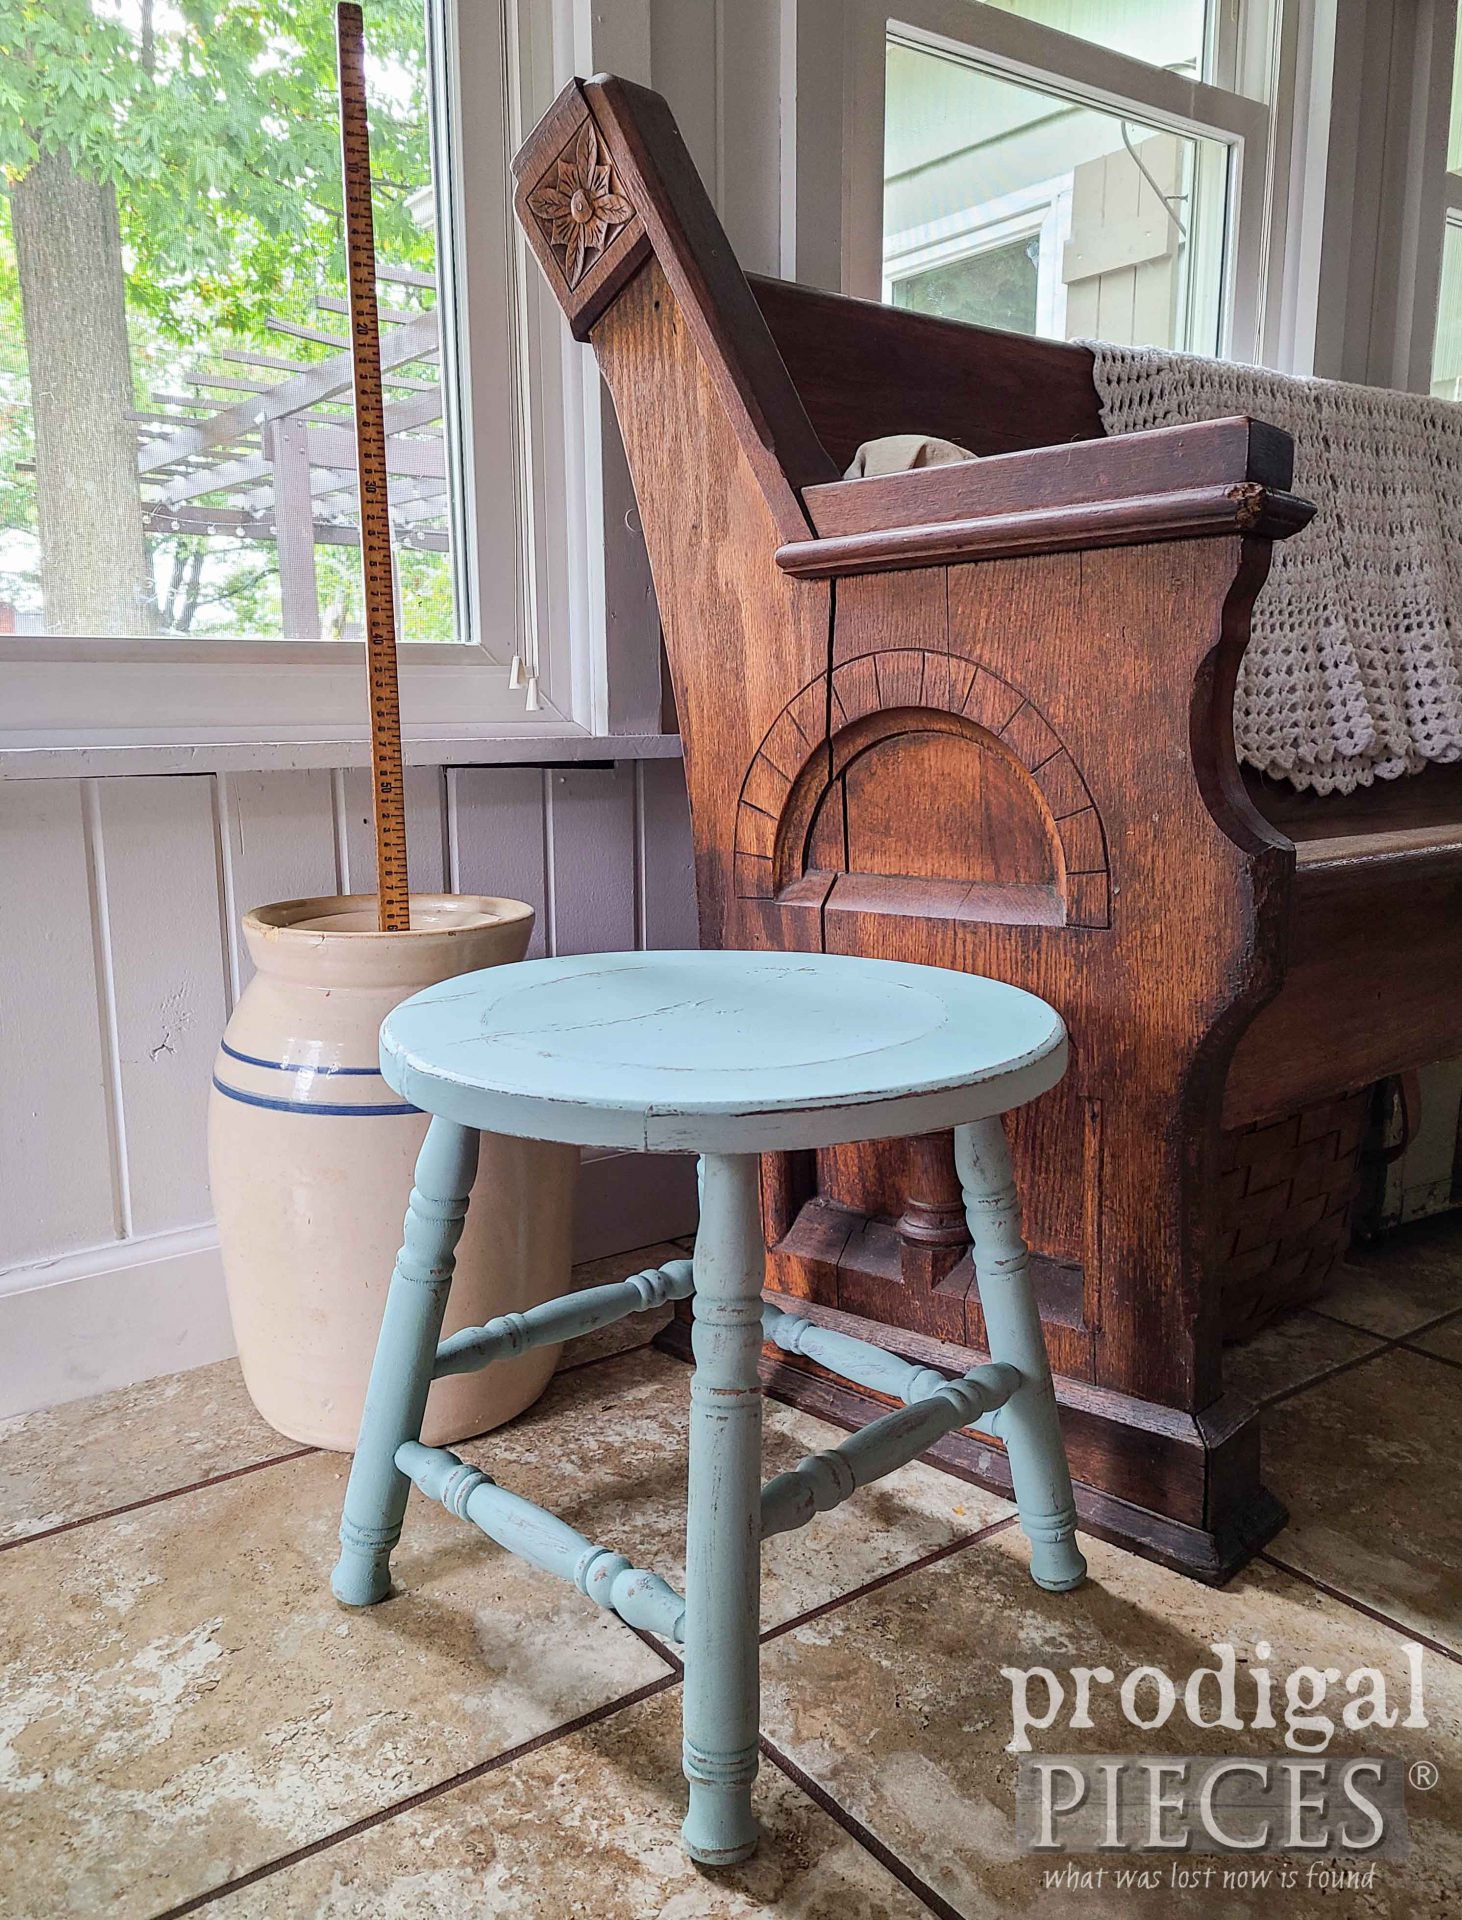 Farmhouse Milking Stool from Upcycled Bar Stool by Larissa of Prodigal Pieces | prodigalpieces.com #prodigalpieces #farmhouse #diy #upcycled #furniture